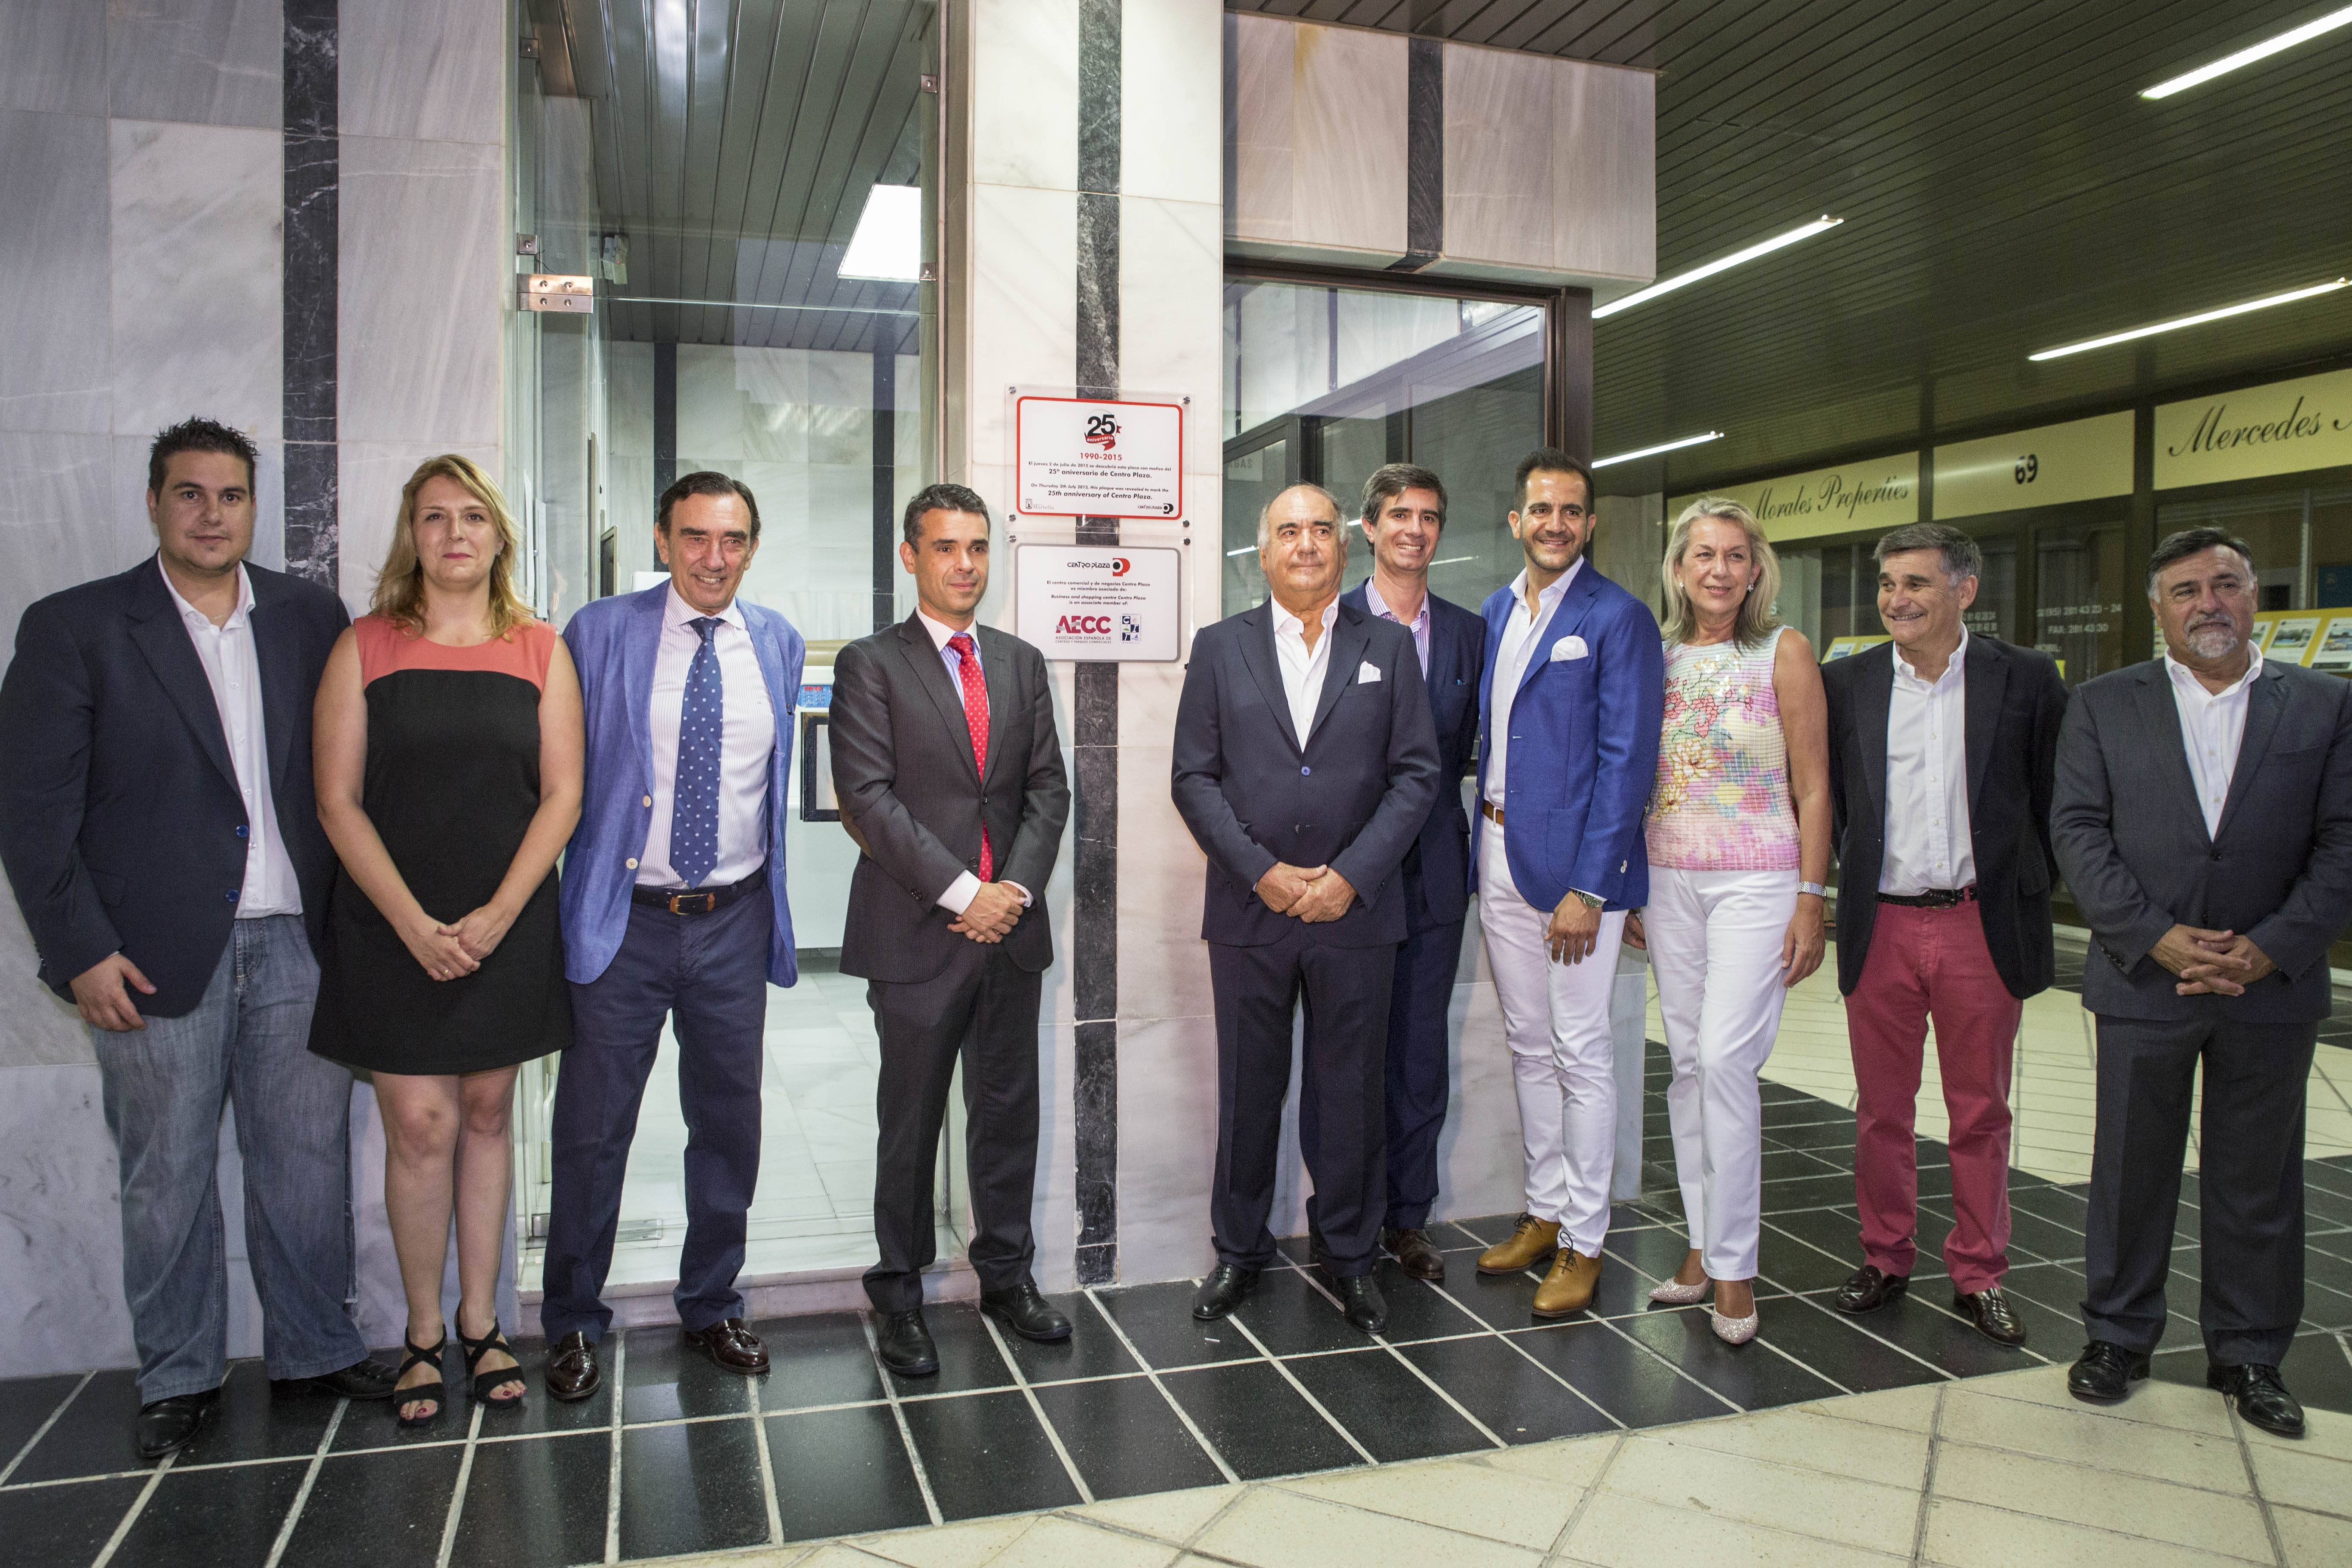 CENTRO PLAZA celebrated 25 years of operation in Marbella with a moving event